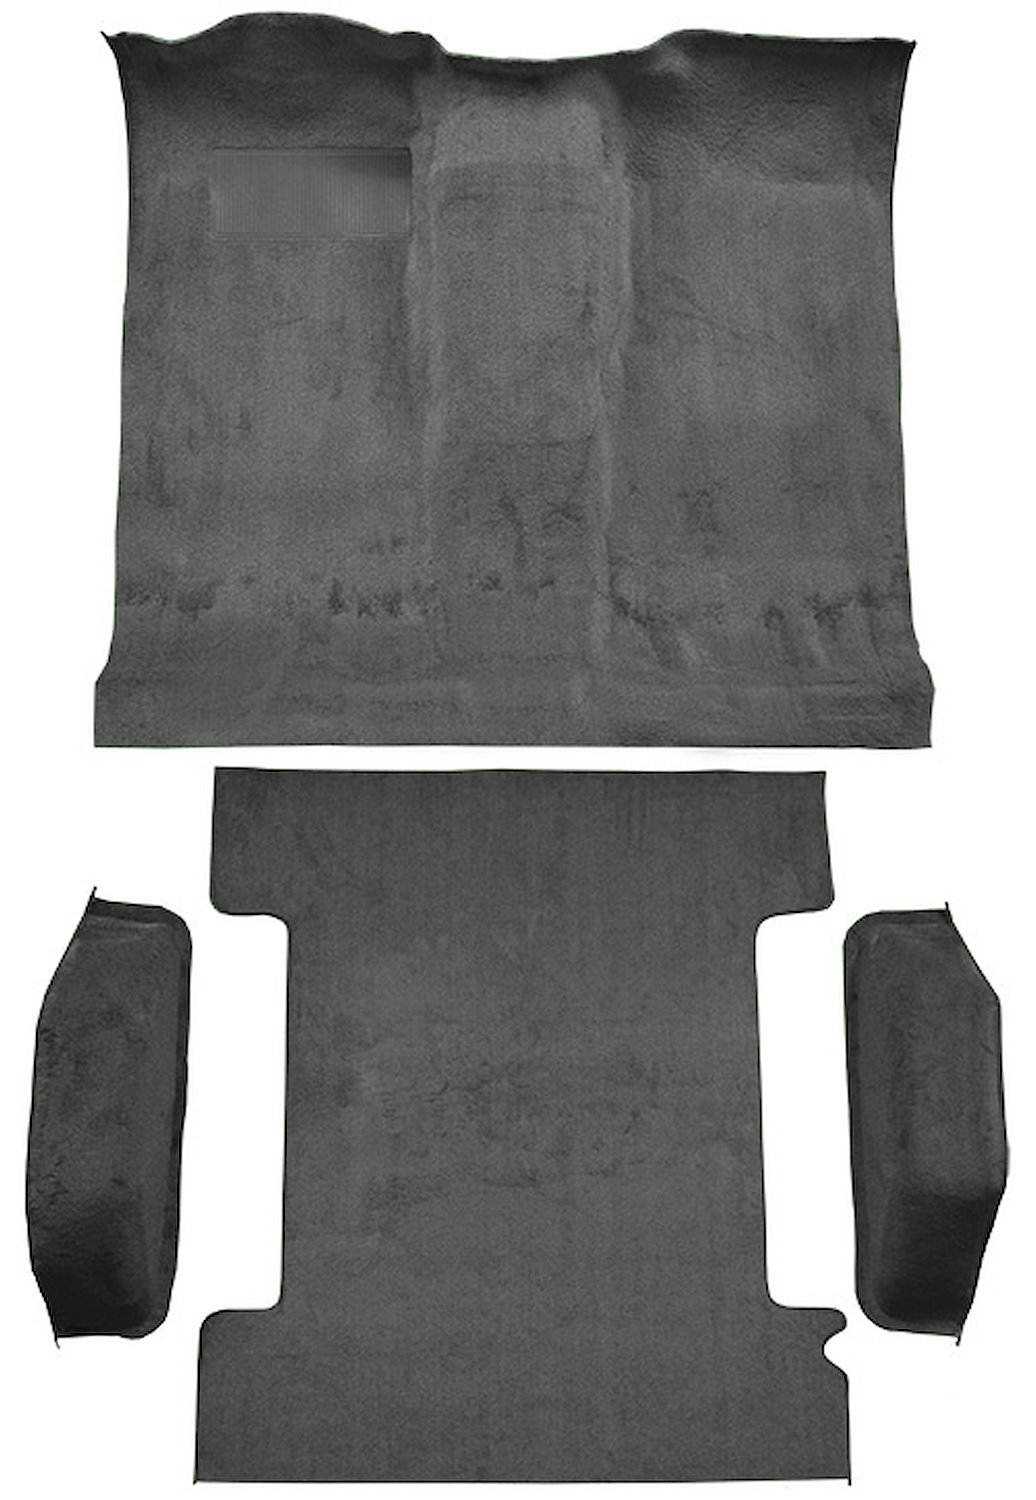 Molded Loop Passenger and Cargo Area Carpet for 1973 Chevrolet Blazer, GMC Jimmy [OE-Style Jute Backing, 4-Piece, Gunmetal Gray]